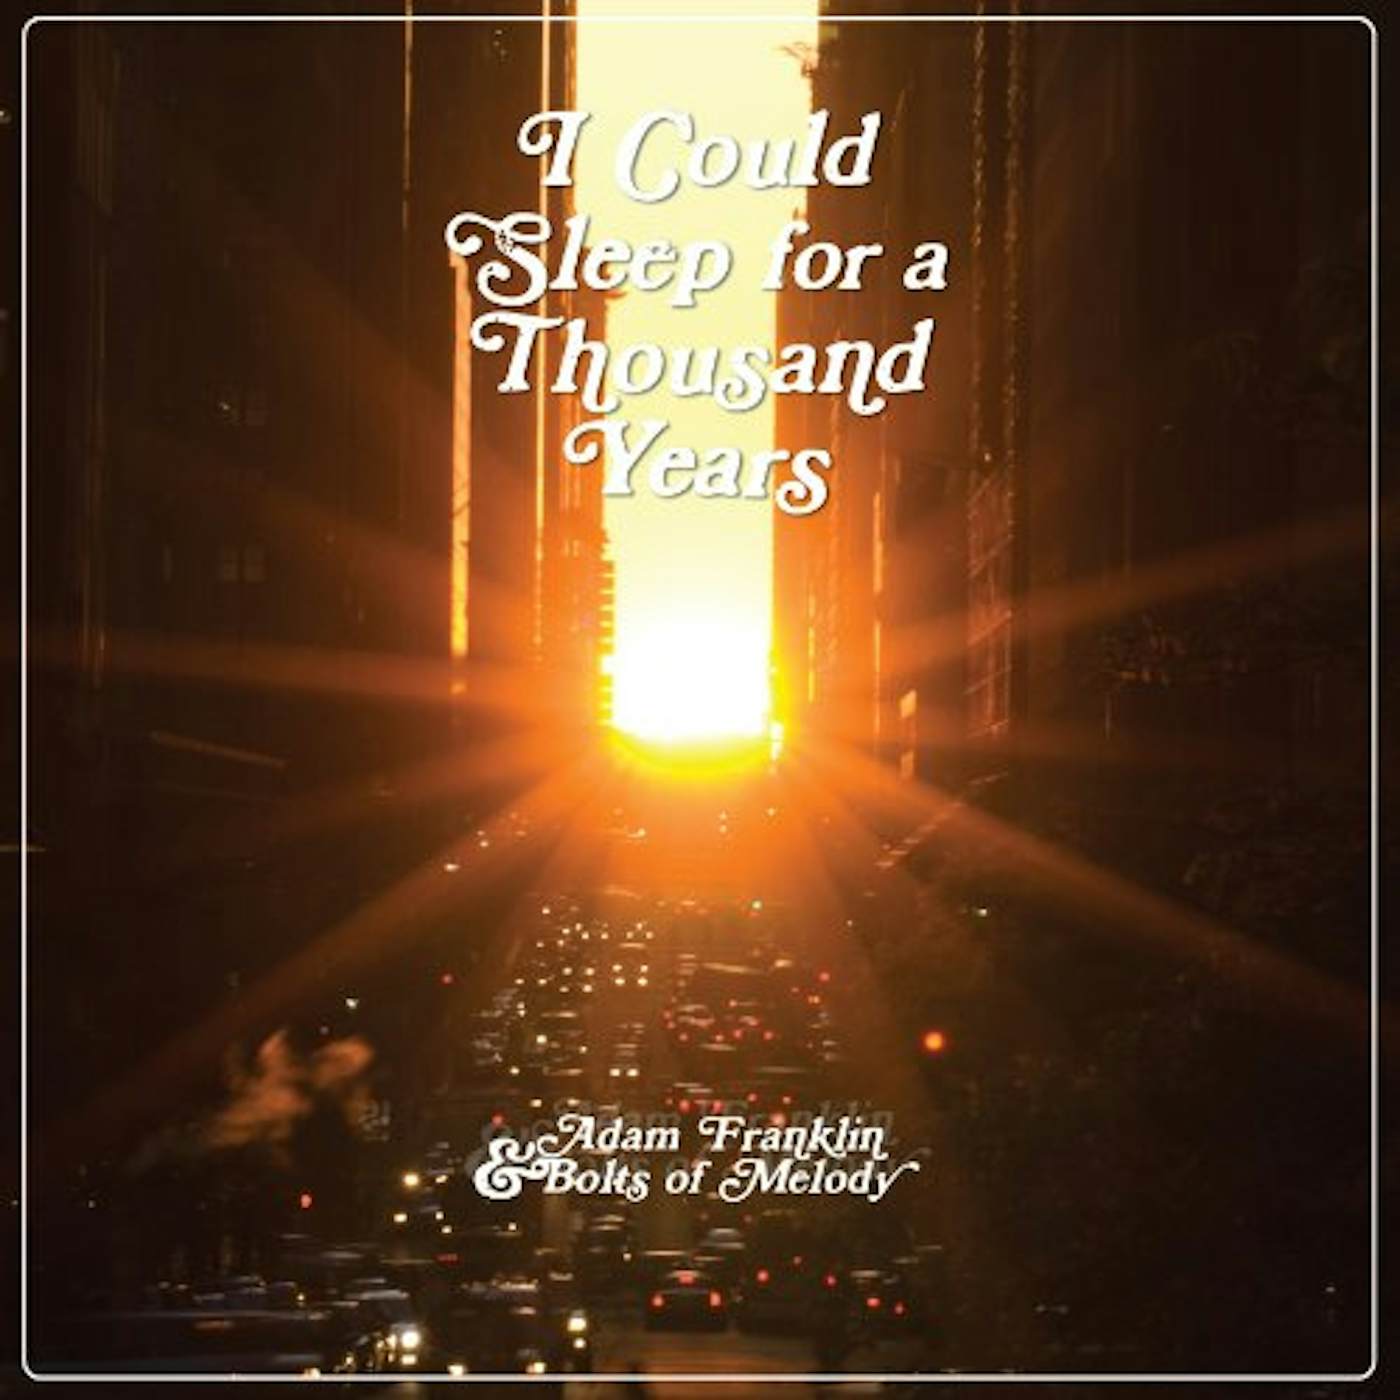 Adam Franklin & Bolts of Melody I Could Sleep for a Thousand Years Vinyl Record